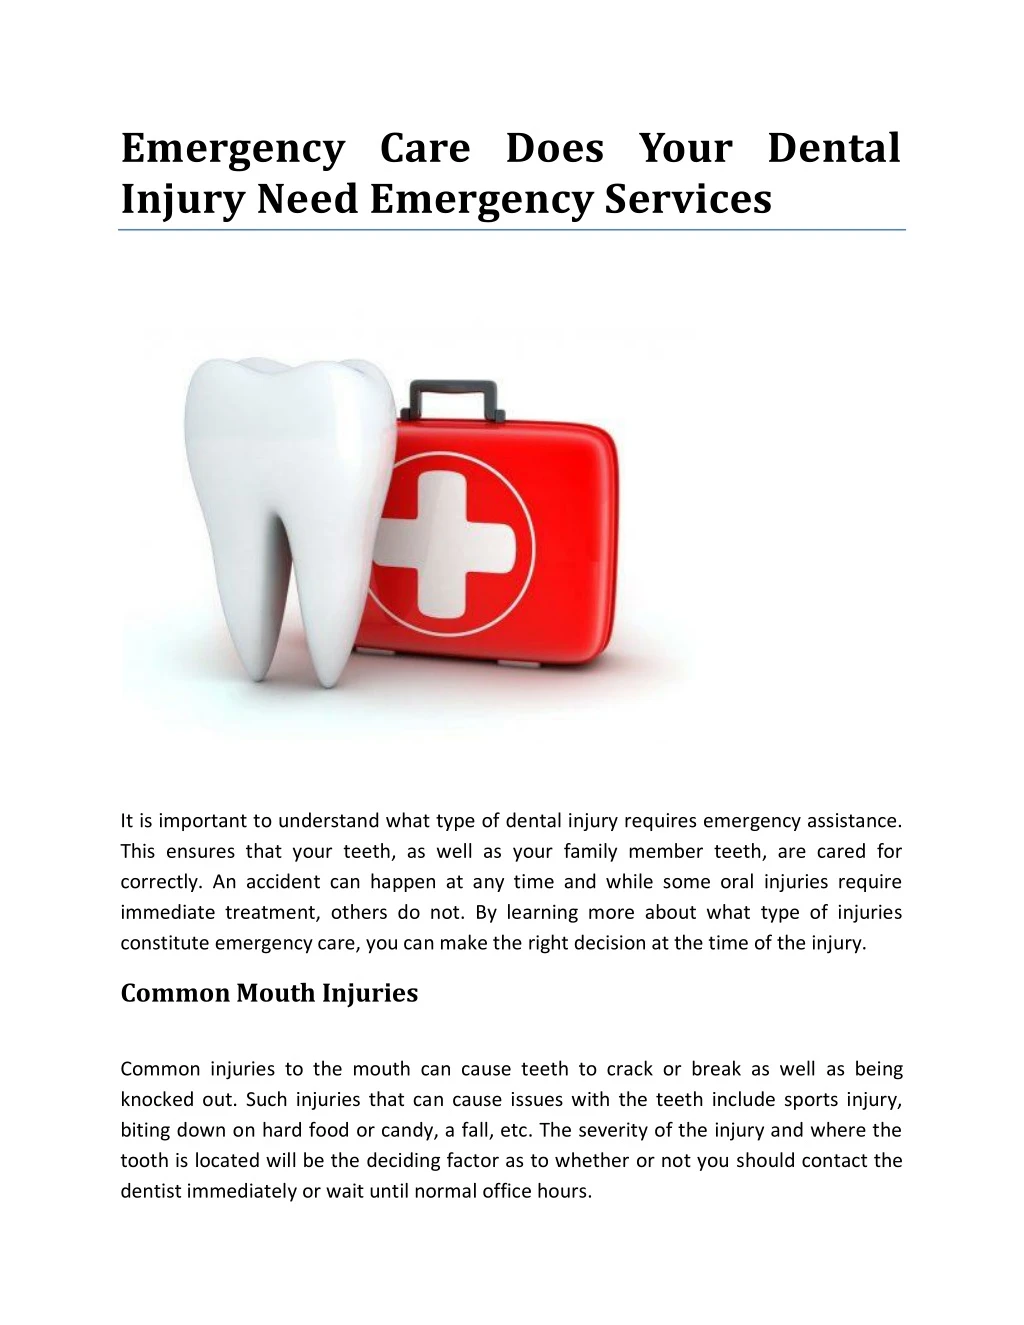 emergency care does your dental injury need